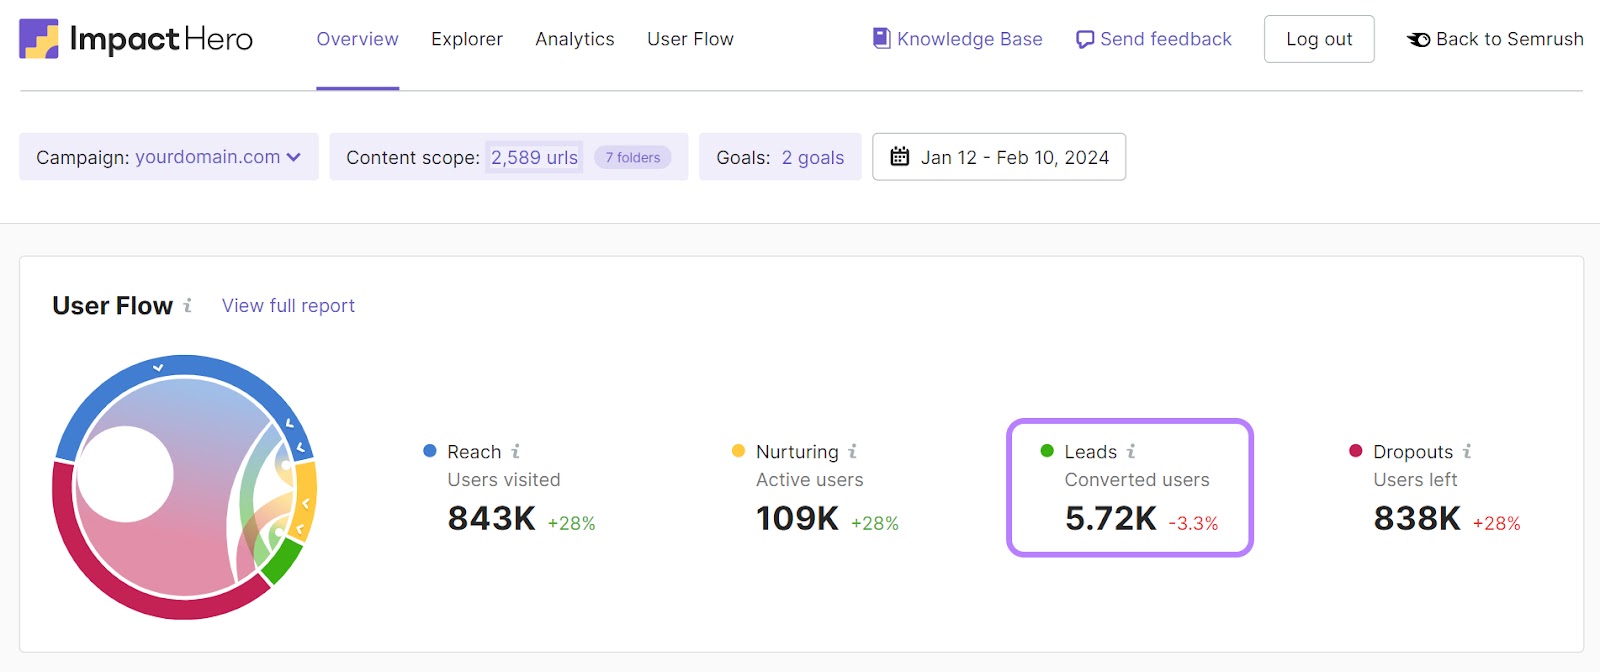 ImpactHero's overview dashboard showing how many users converted